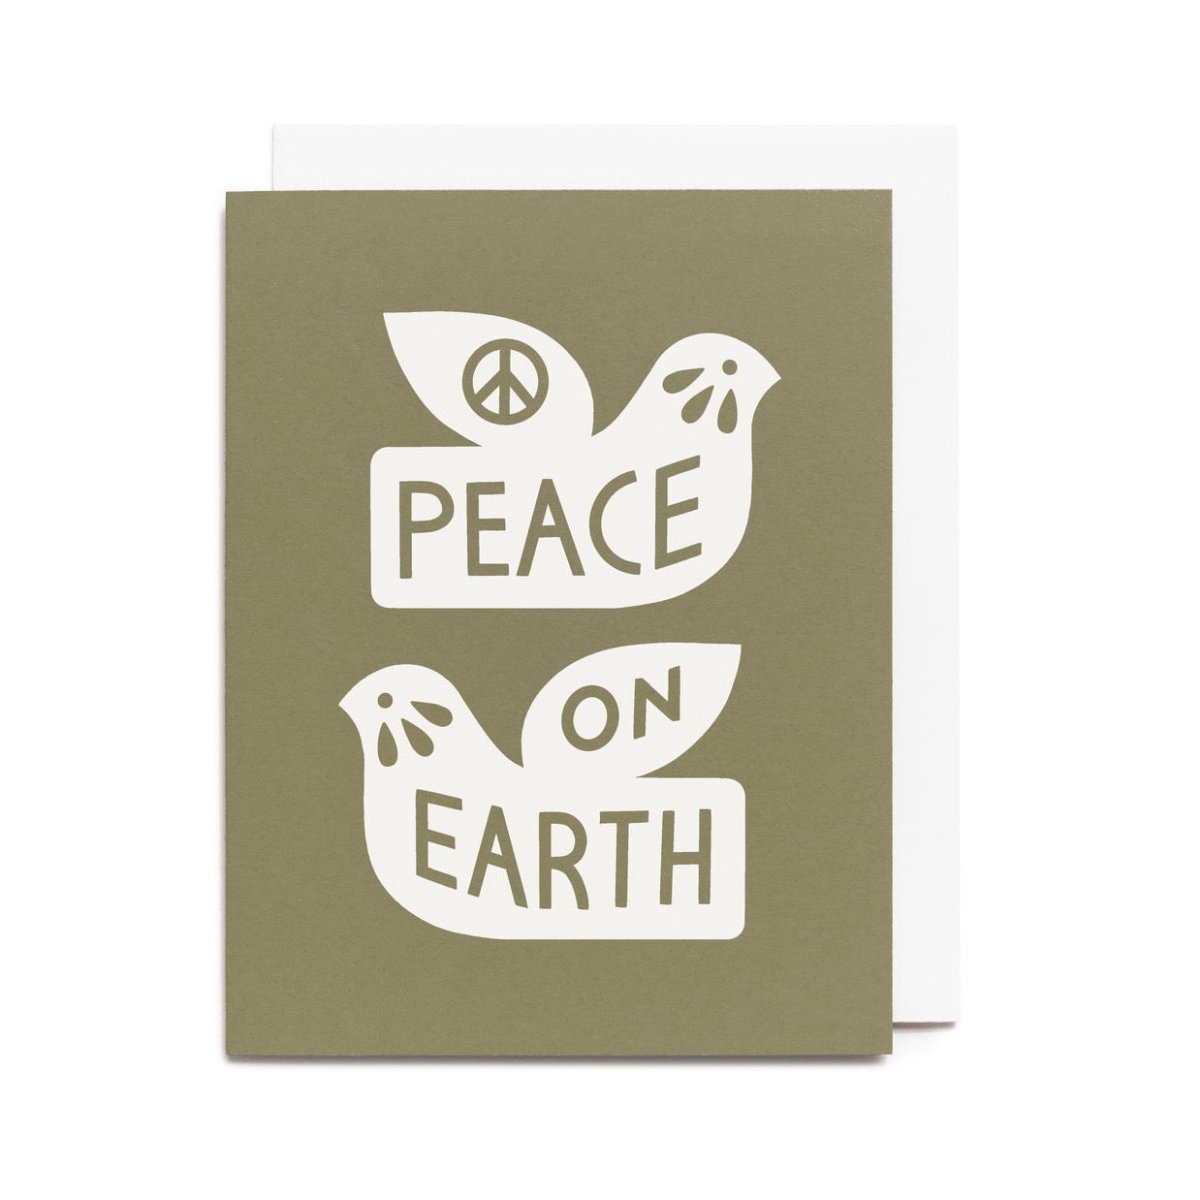 An olive card with white doves that reads "PEACE ON EARTH." Designed and handcrafted by Worthwhile Paper in Ypsilanti, MI.